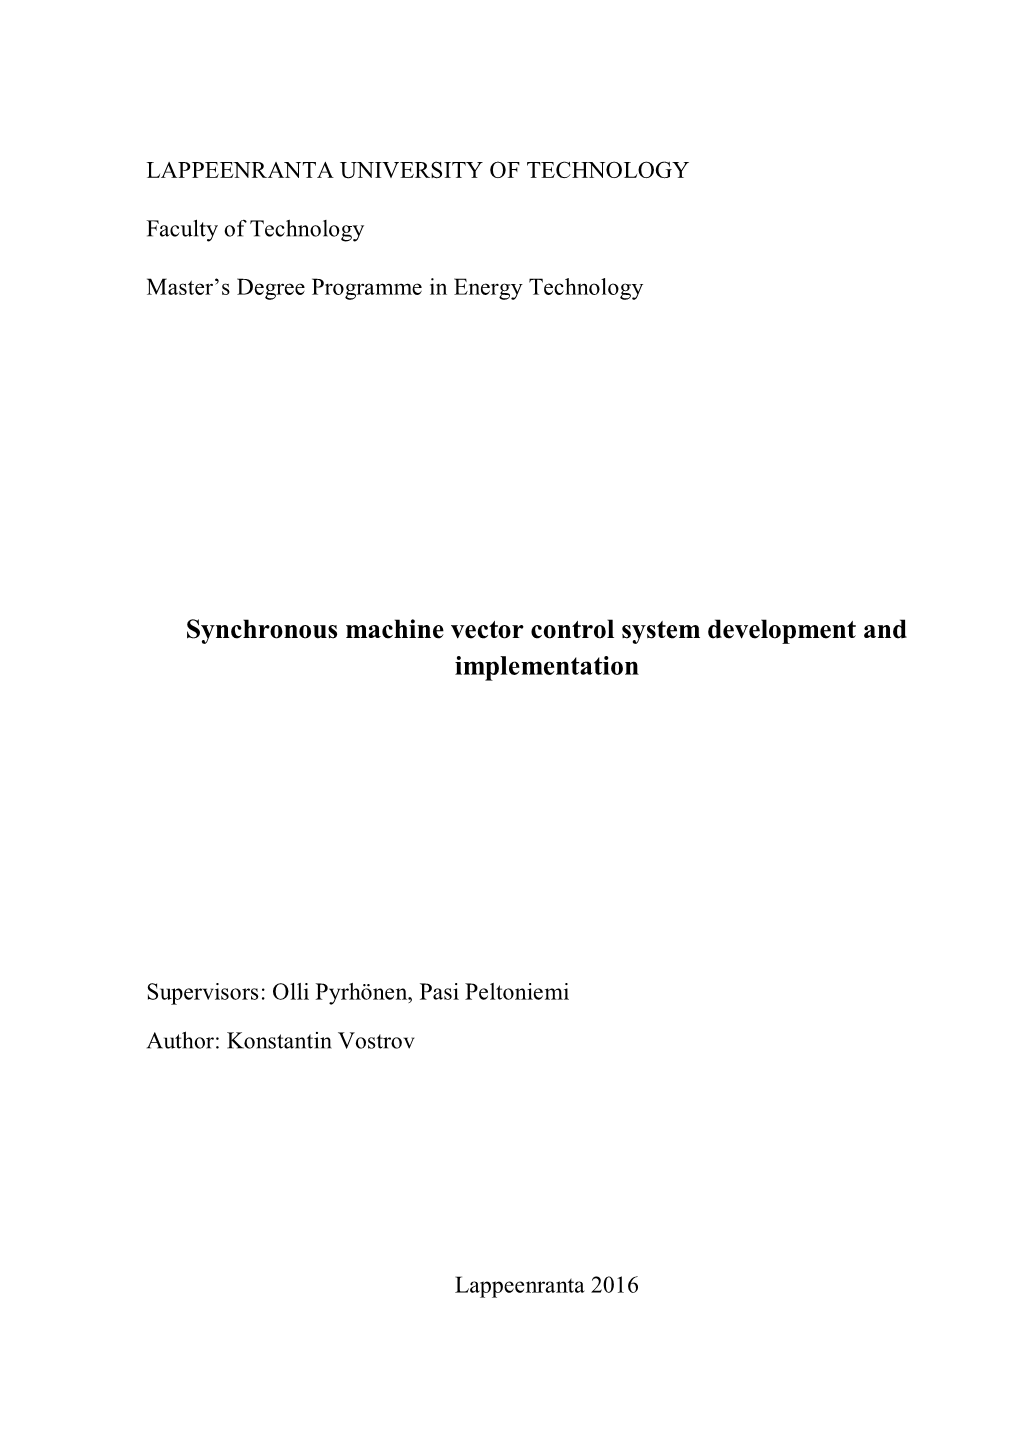 Synchronous Machine Vector Control System Development and Implementation